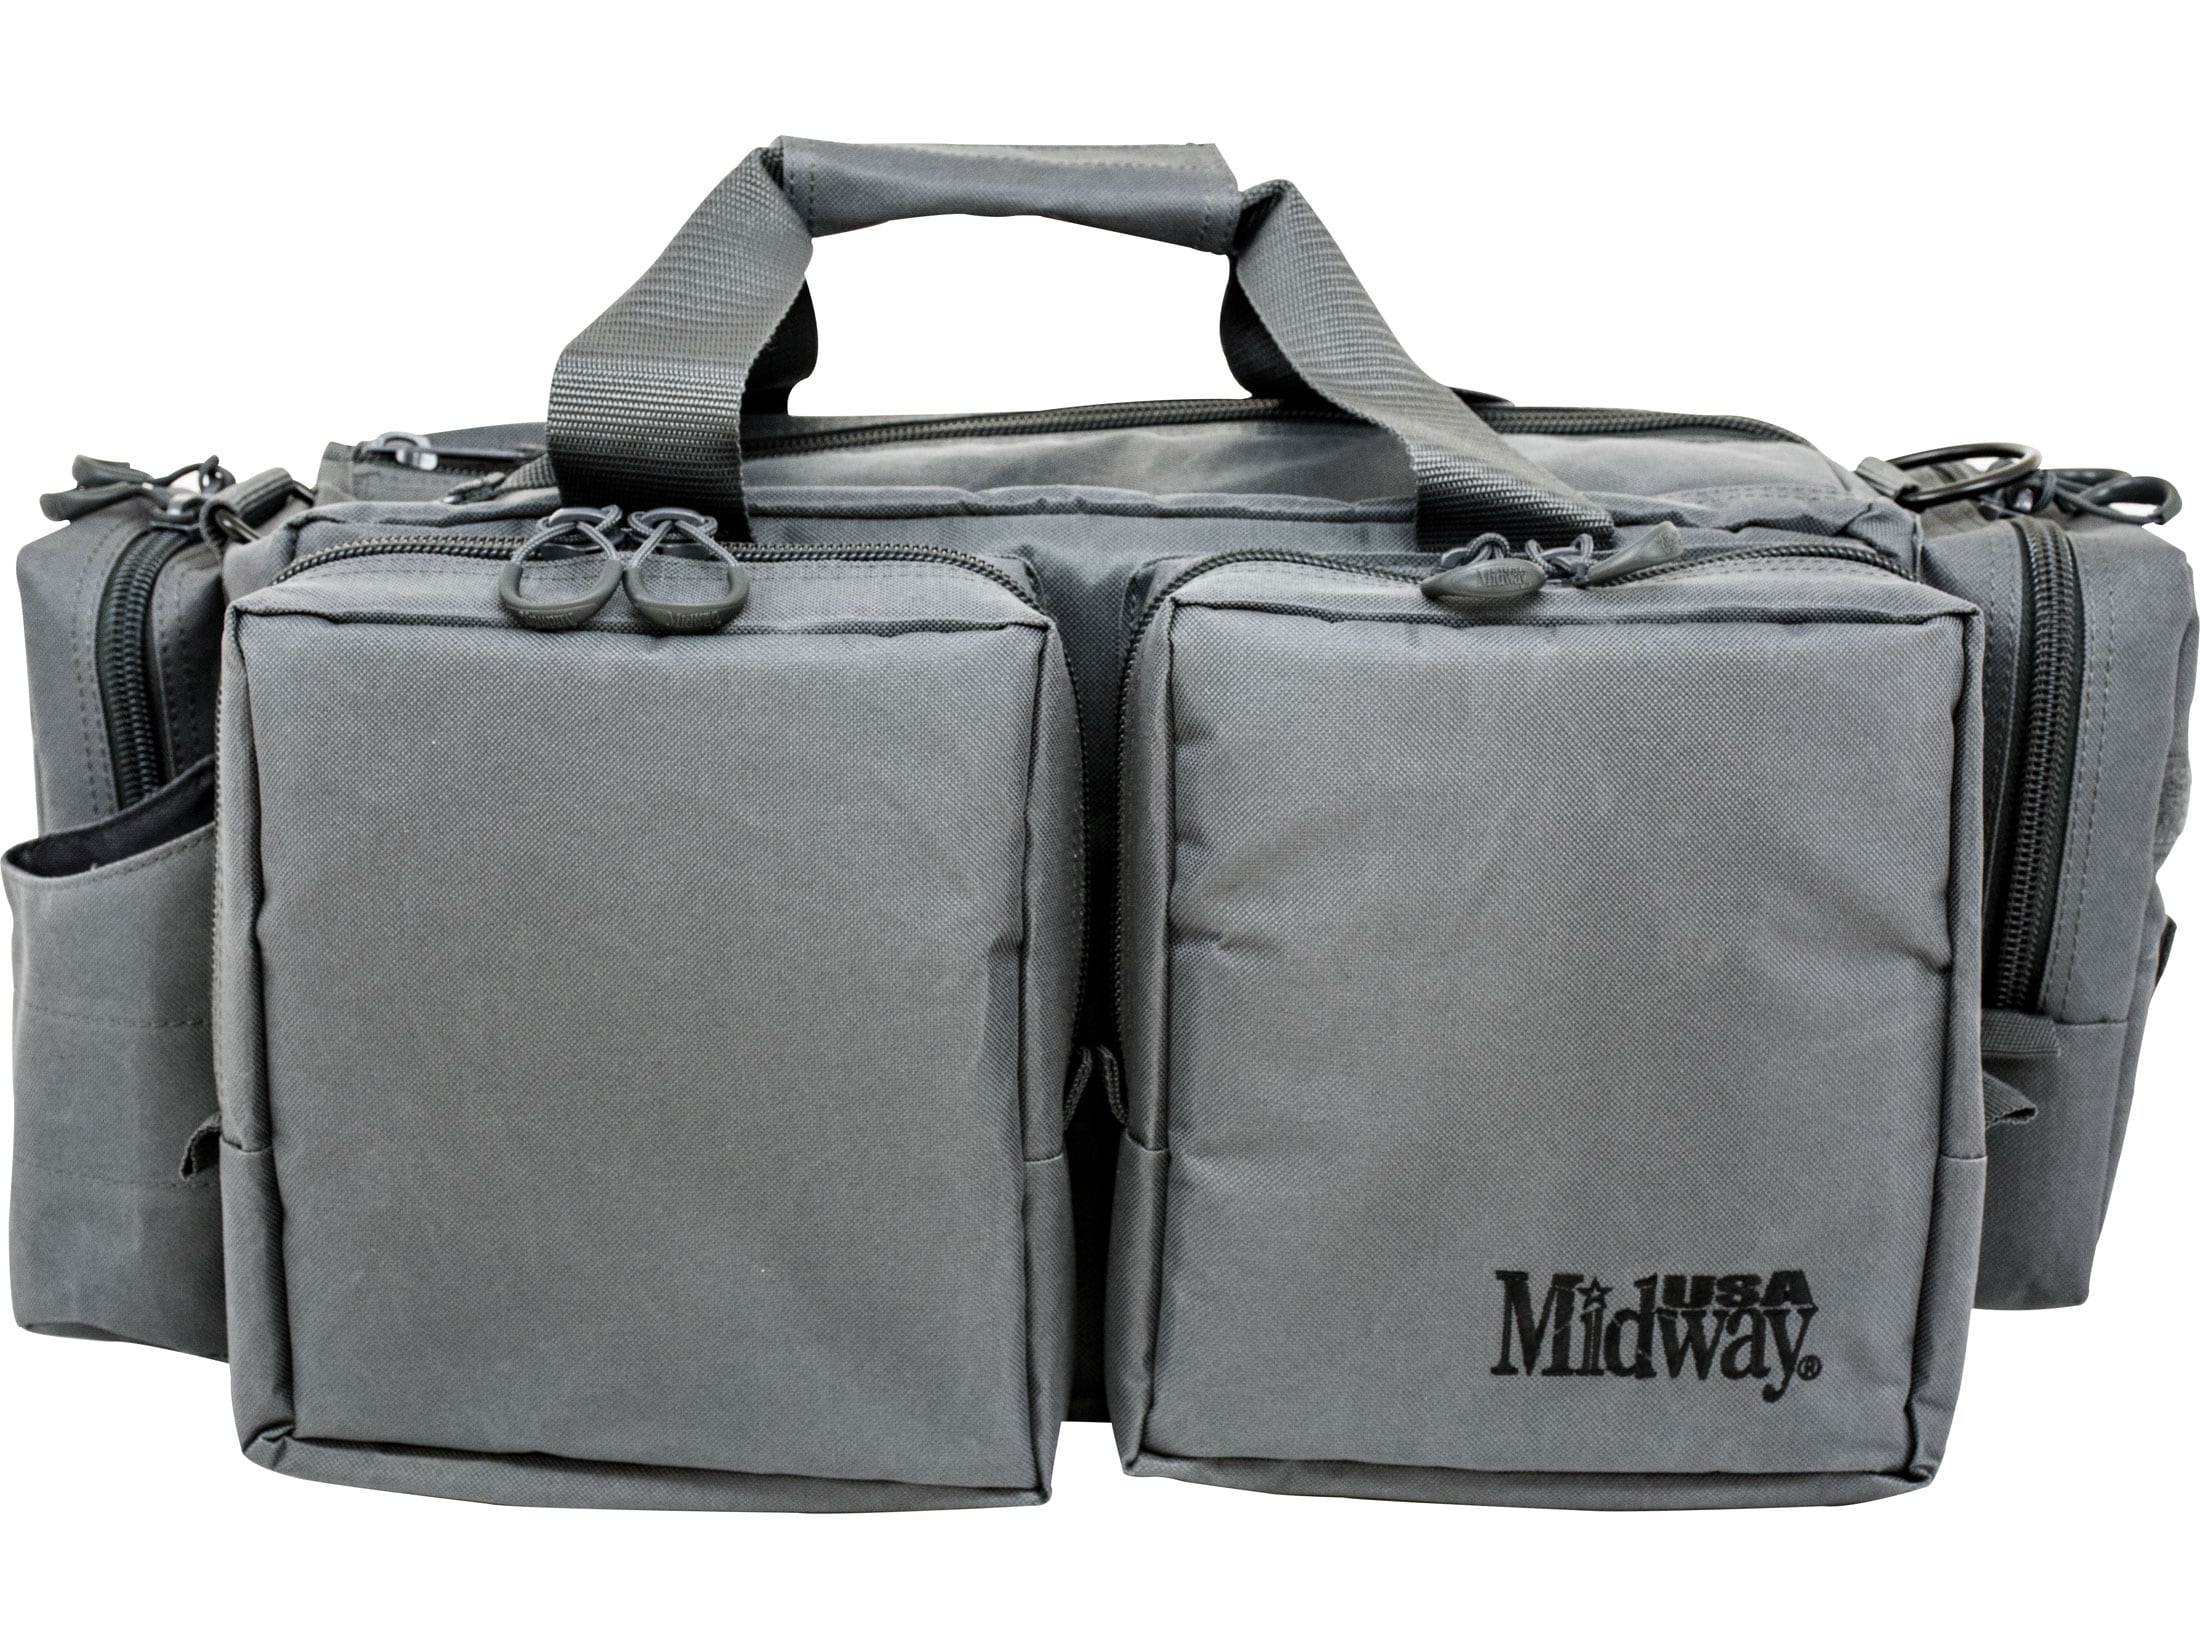 The best range bag made is on sale at Midway | Page 3 | The Outdoors Trader